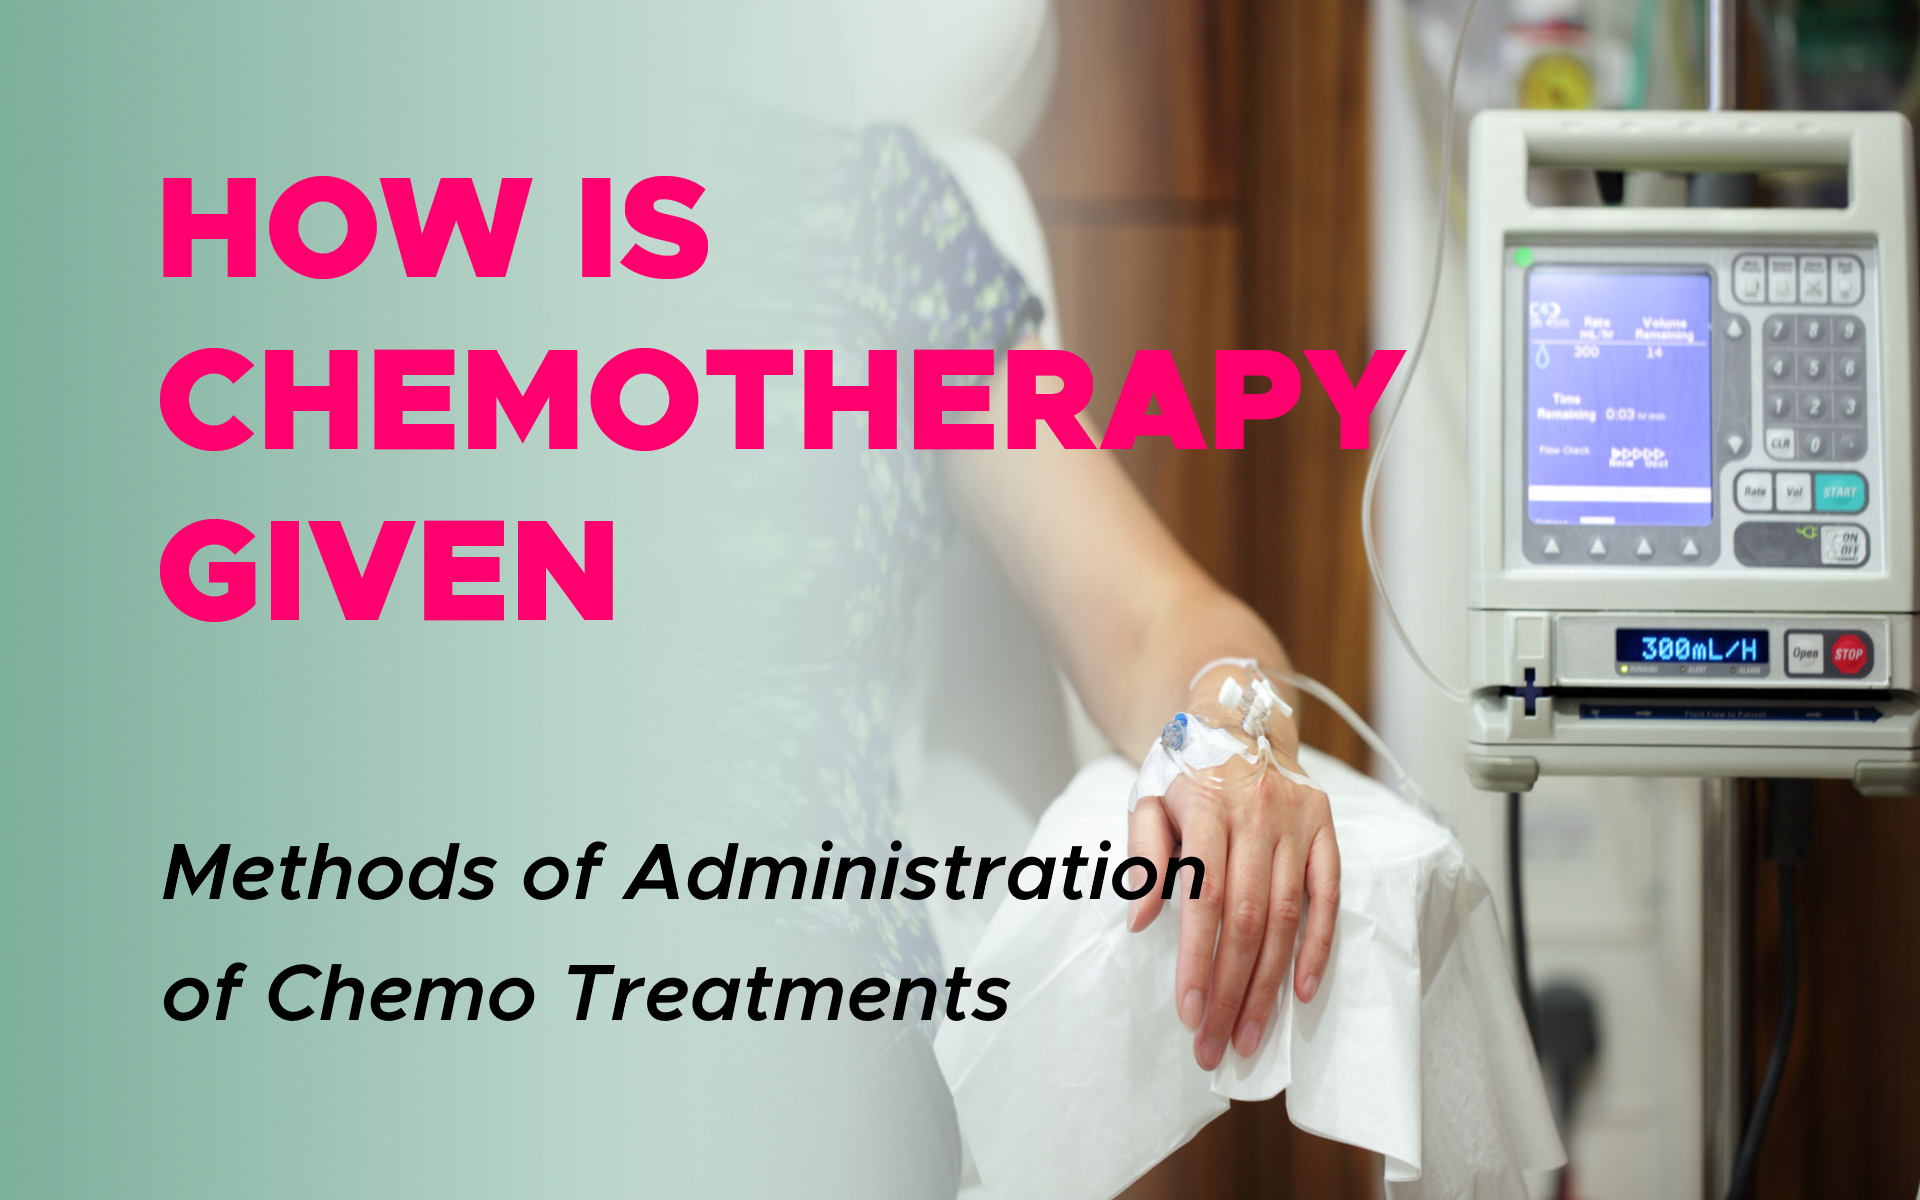 How Is Chemotherapy Given?